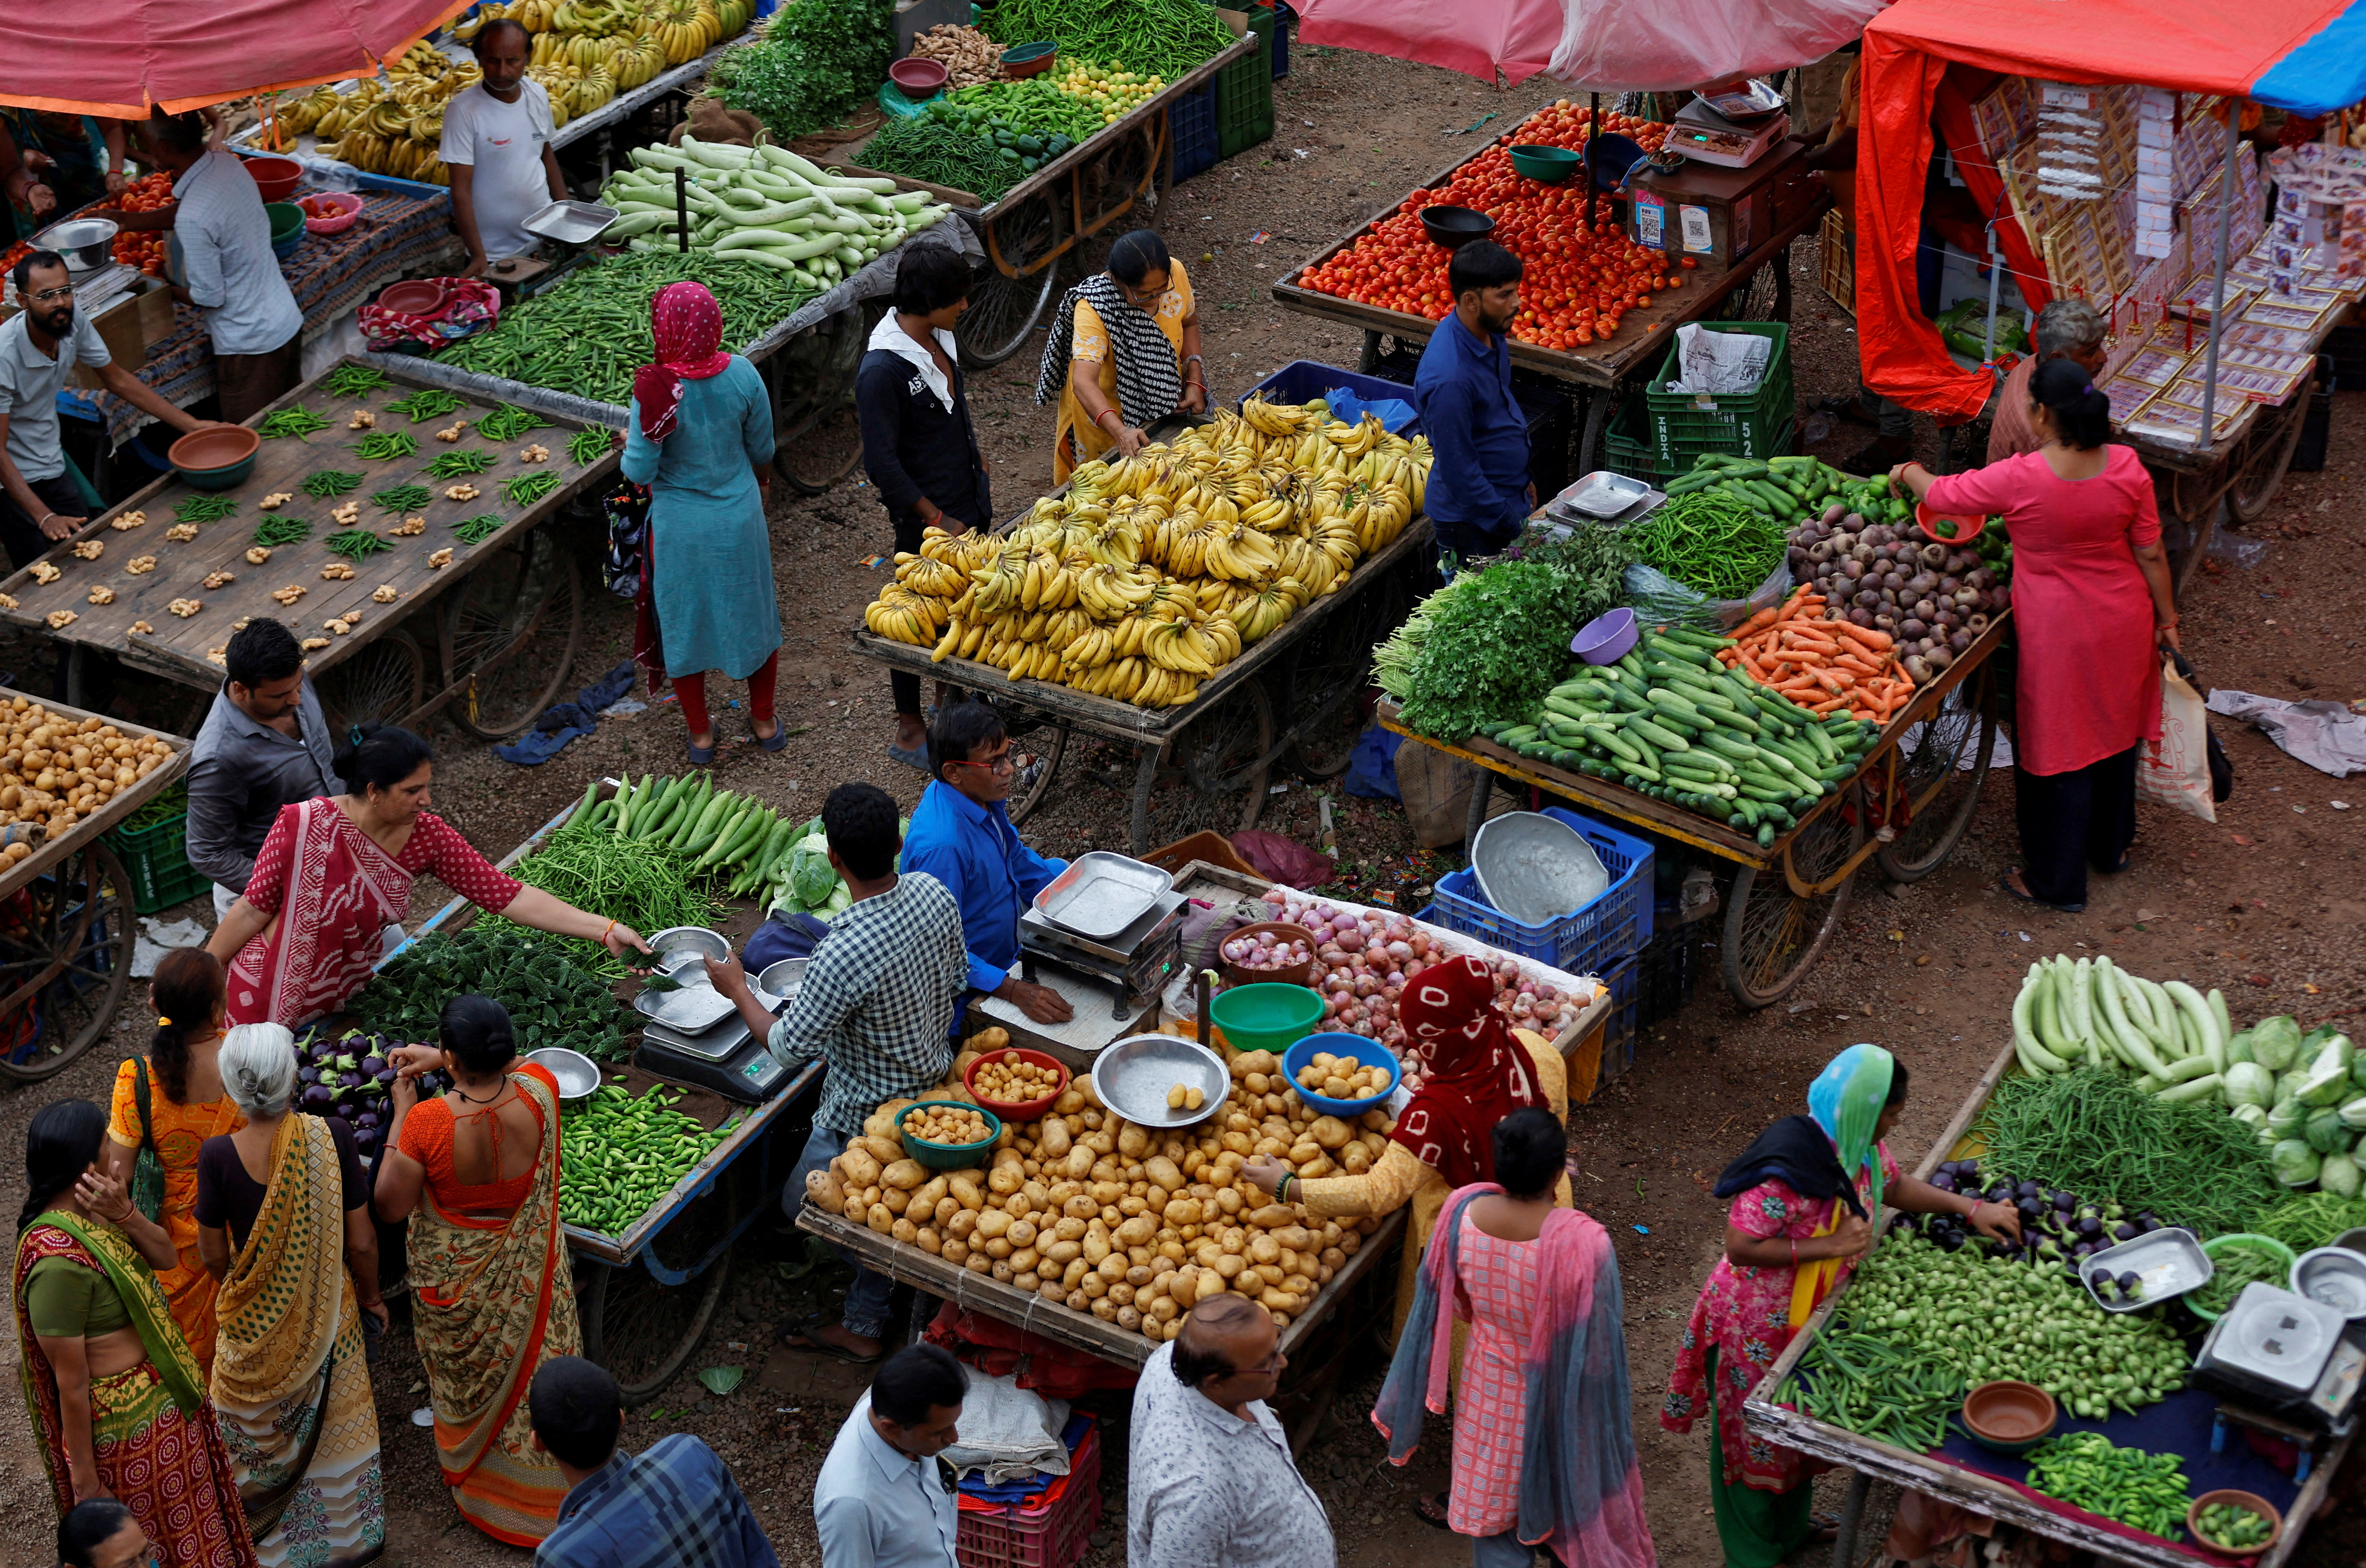 Customers buy fruits and vegetables at an open air evening market in Ahmedabad, India